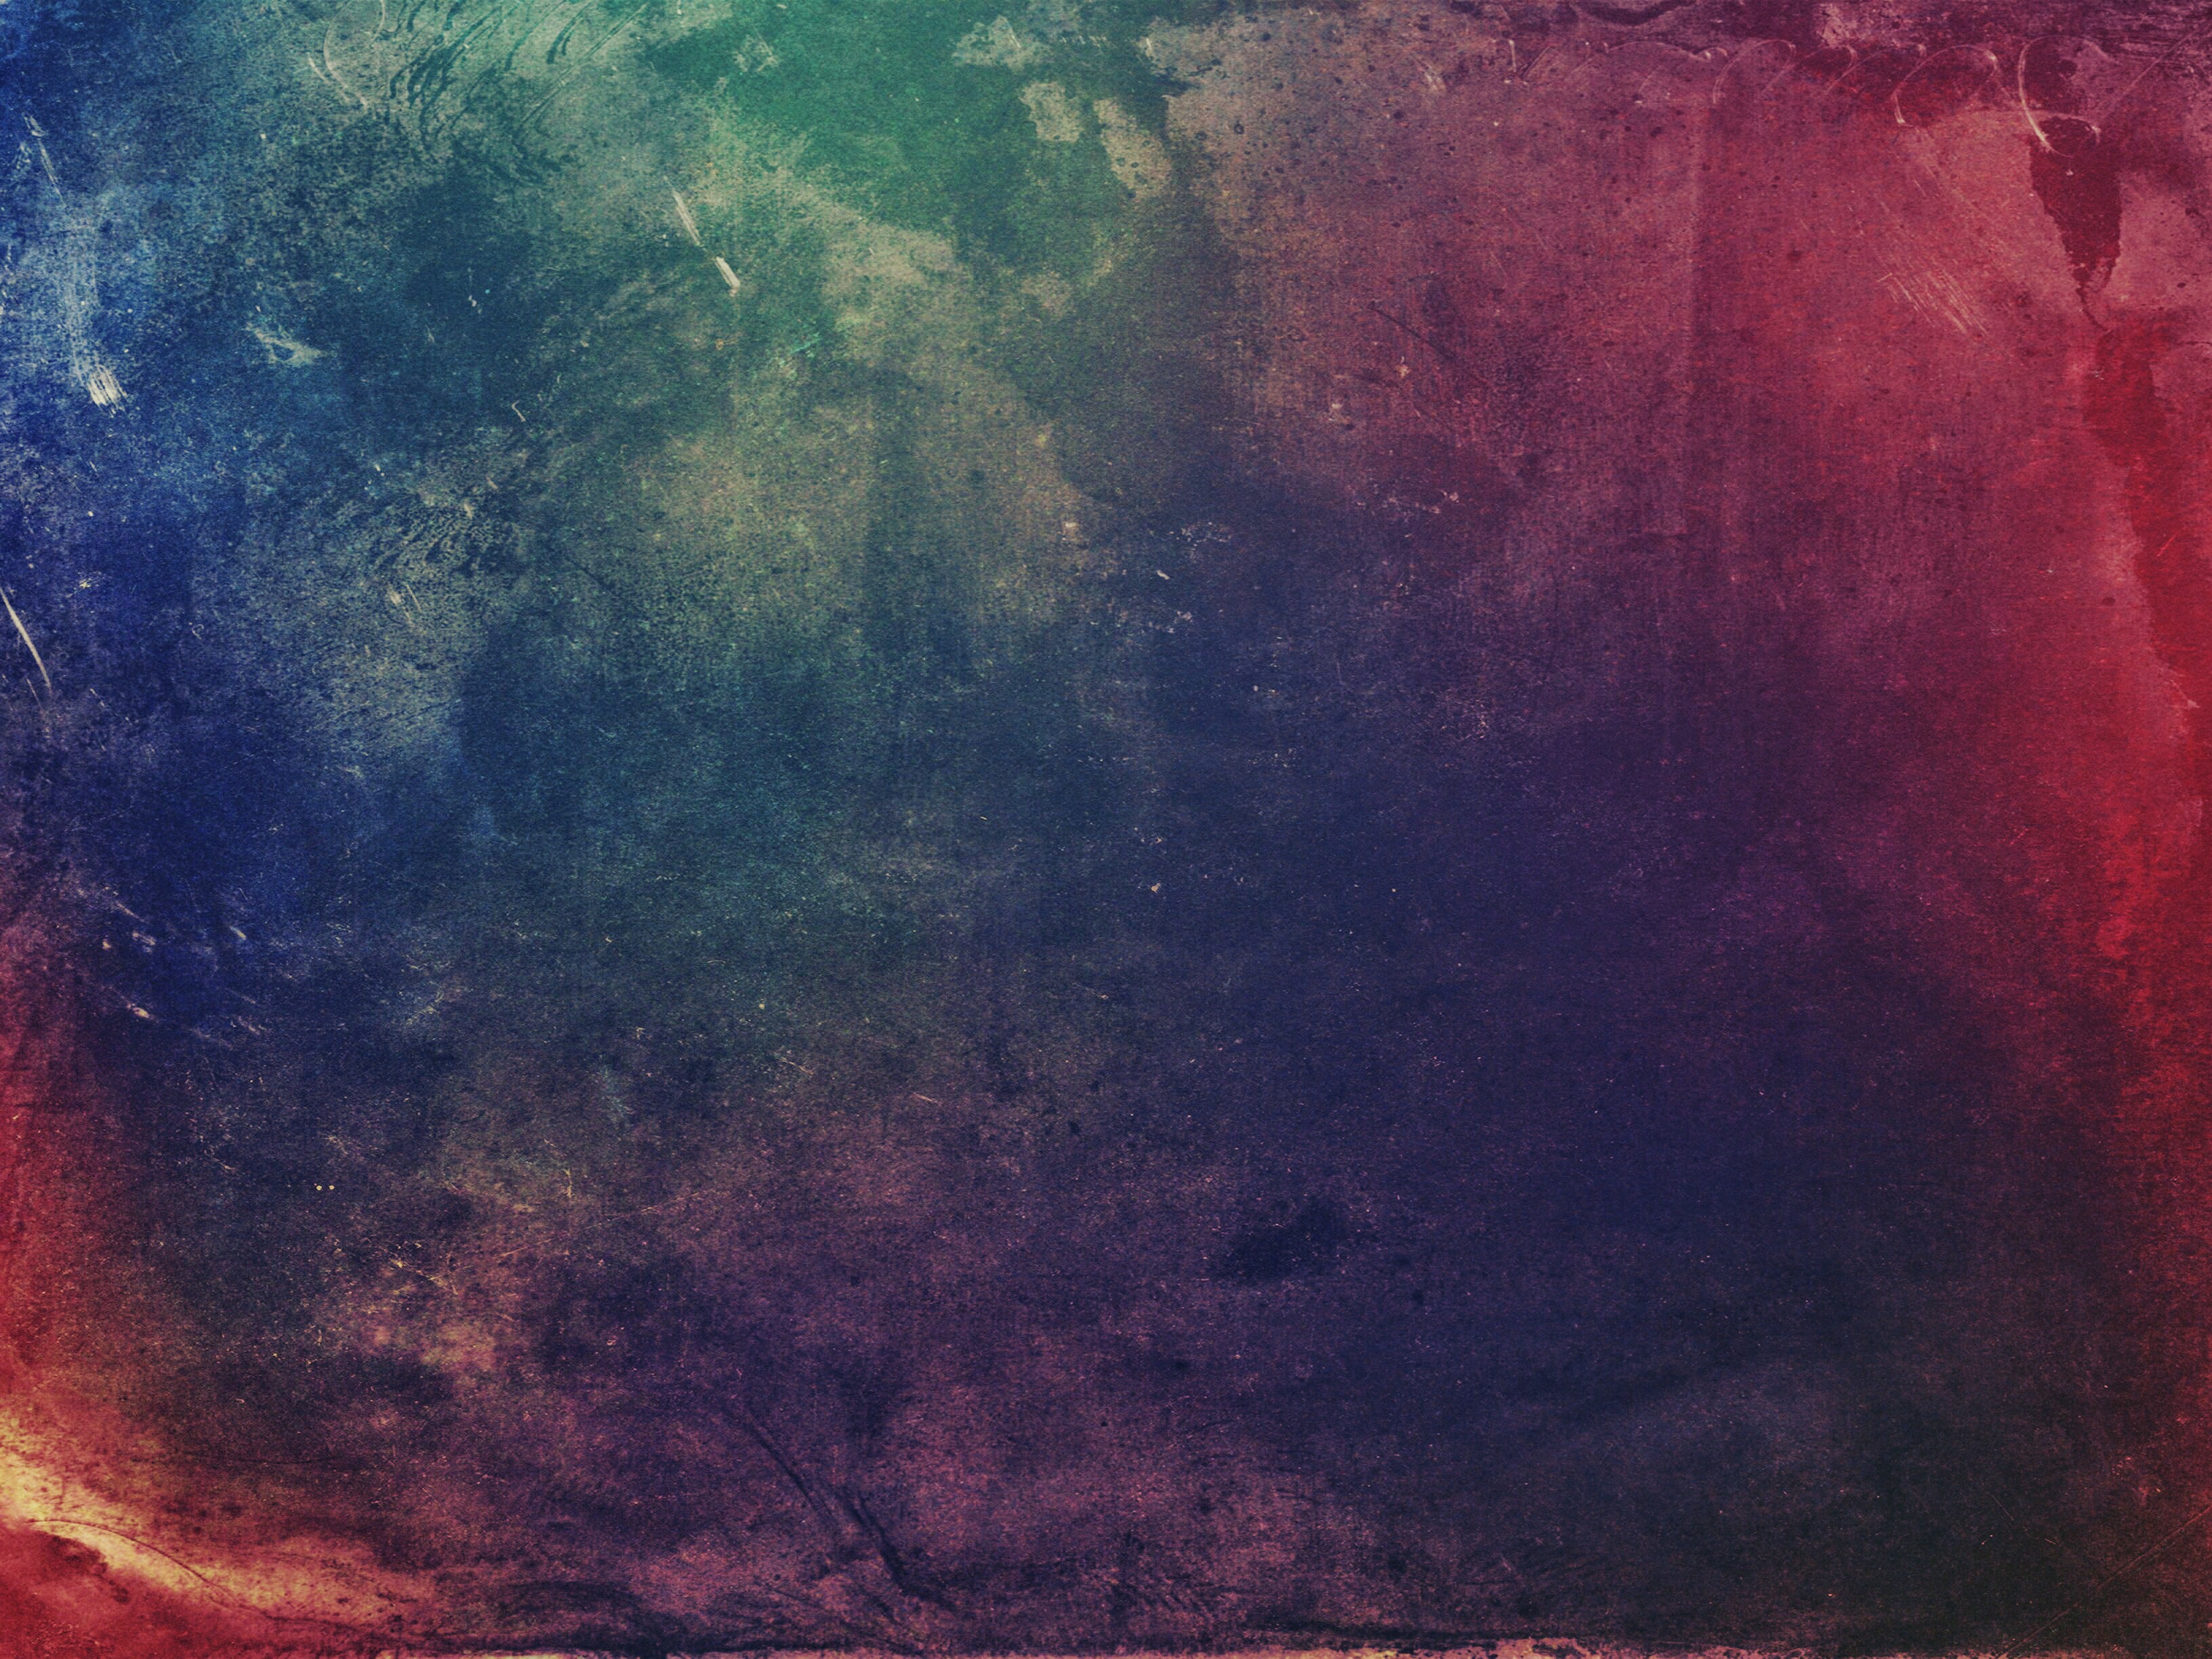 136598 download wallpaper gradient, dark, texture, textures, stains, spots screensavers and pictures for free